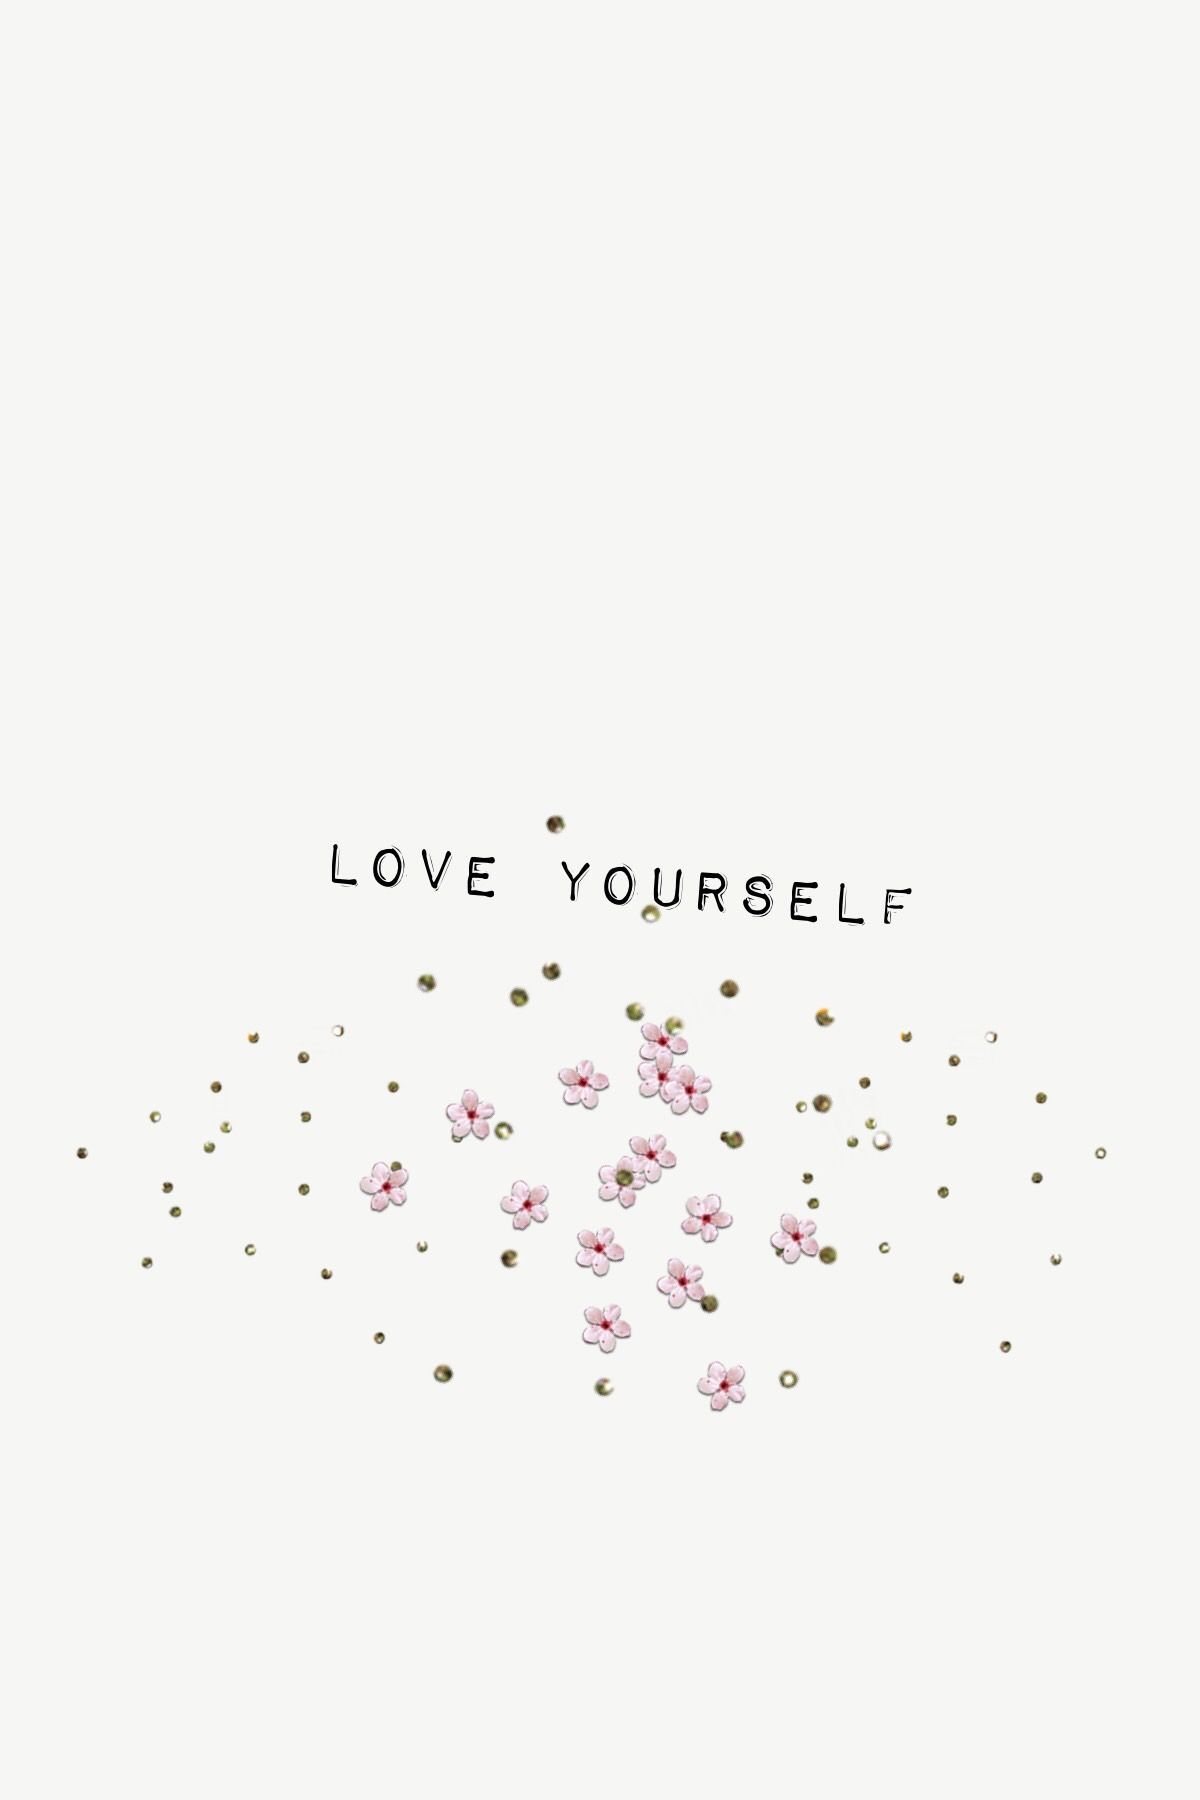 Love yourself, selflove, seltesteem, recovery wallpaper, iPhone